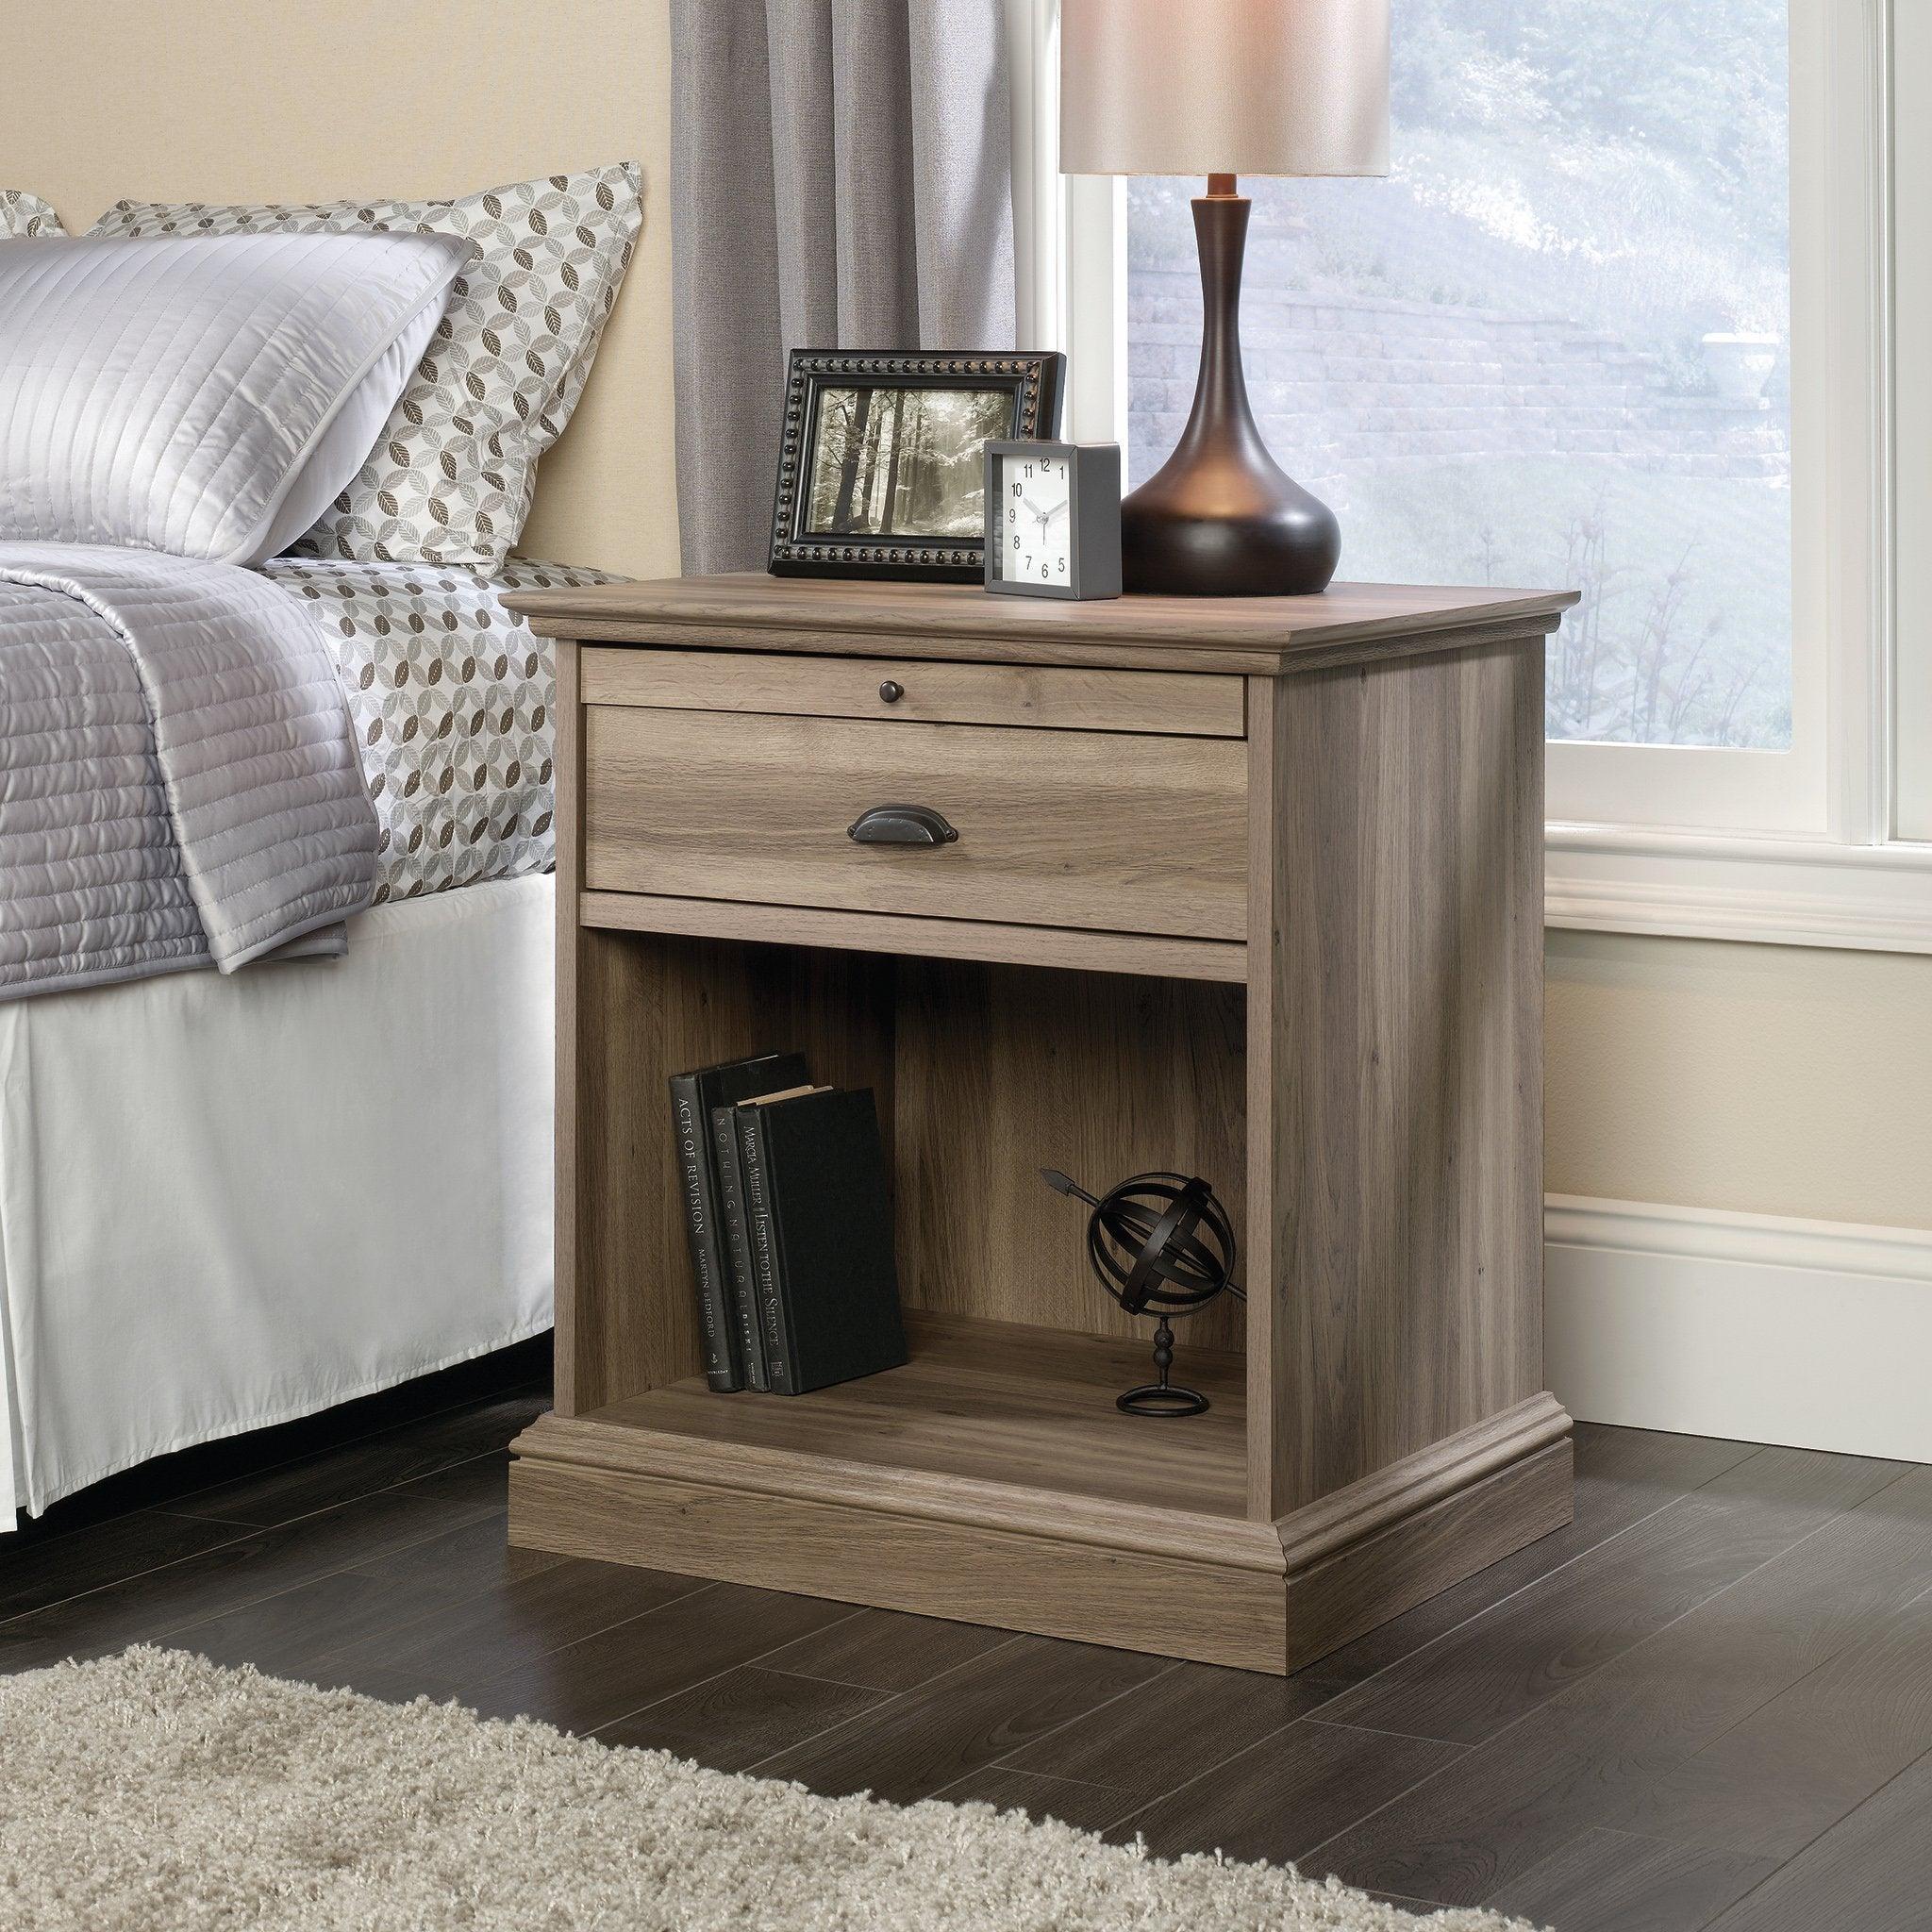 Barrister home night stand - image 1